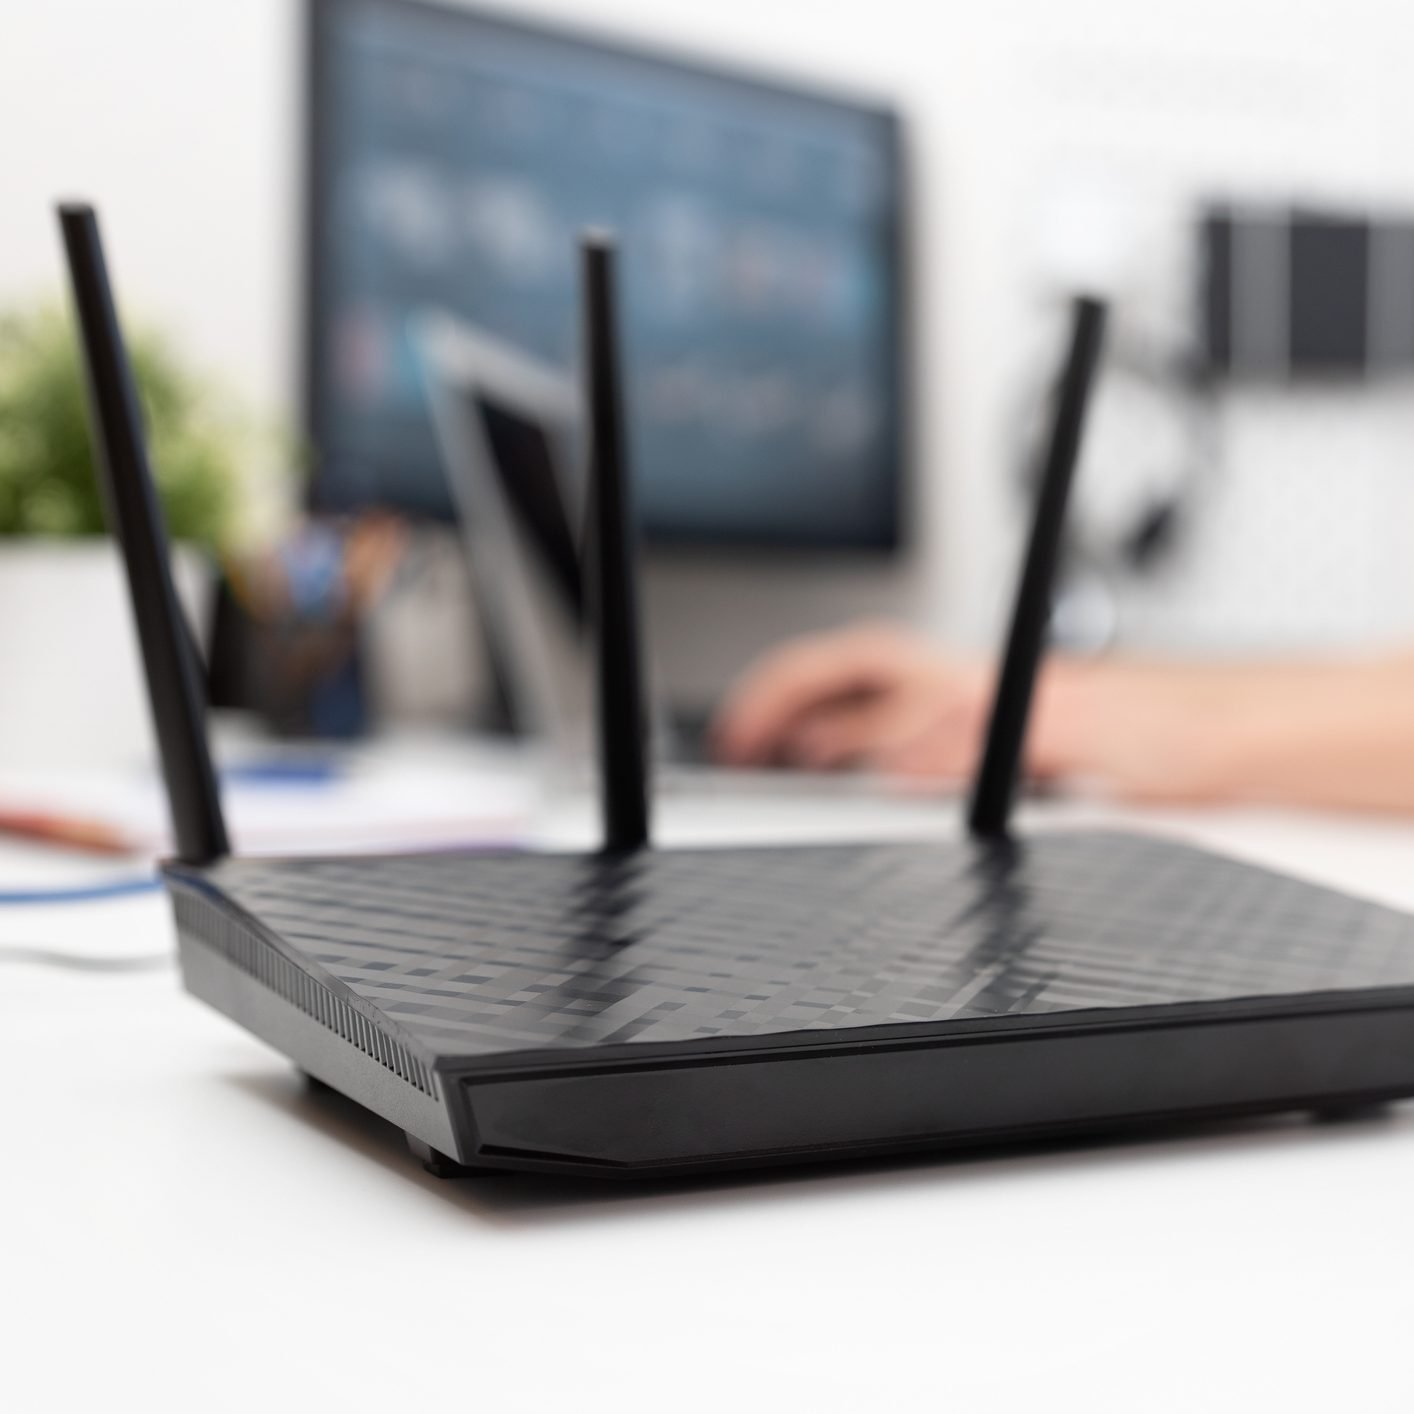 This Is How Often You Should Be Rebooting Your Router